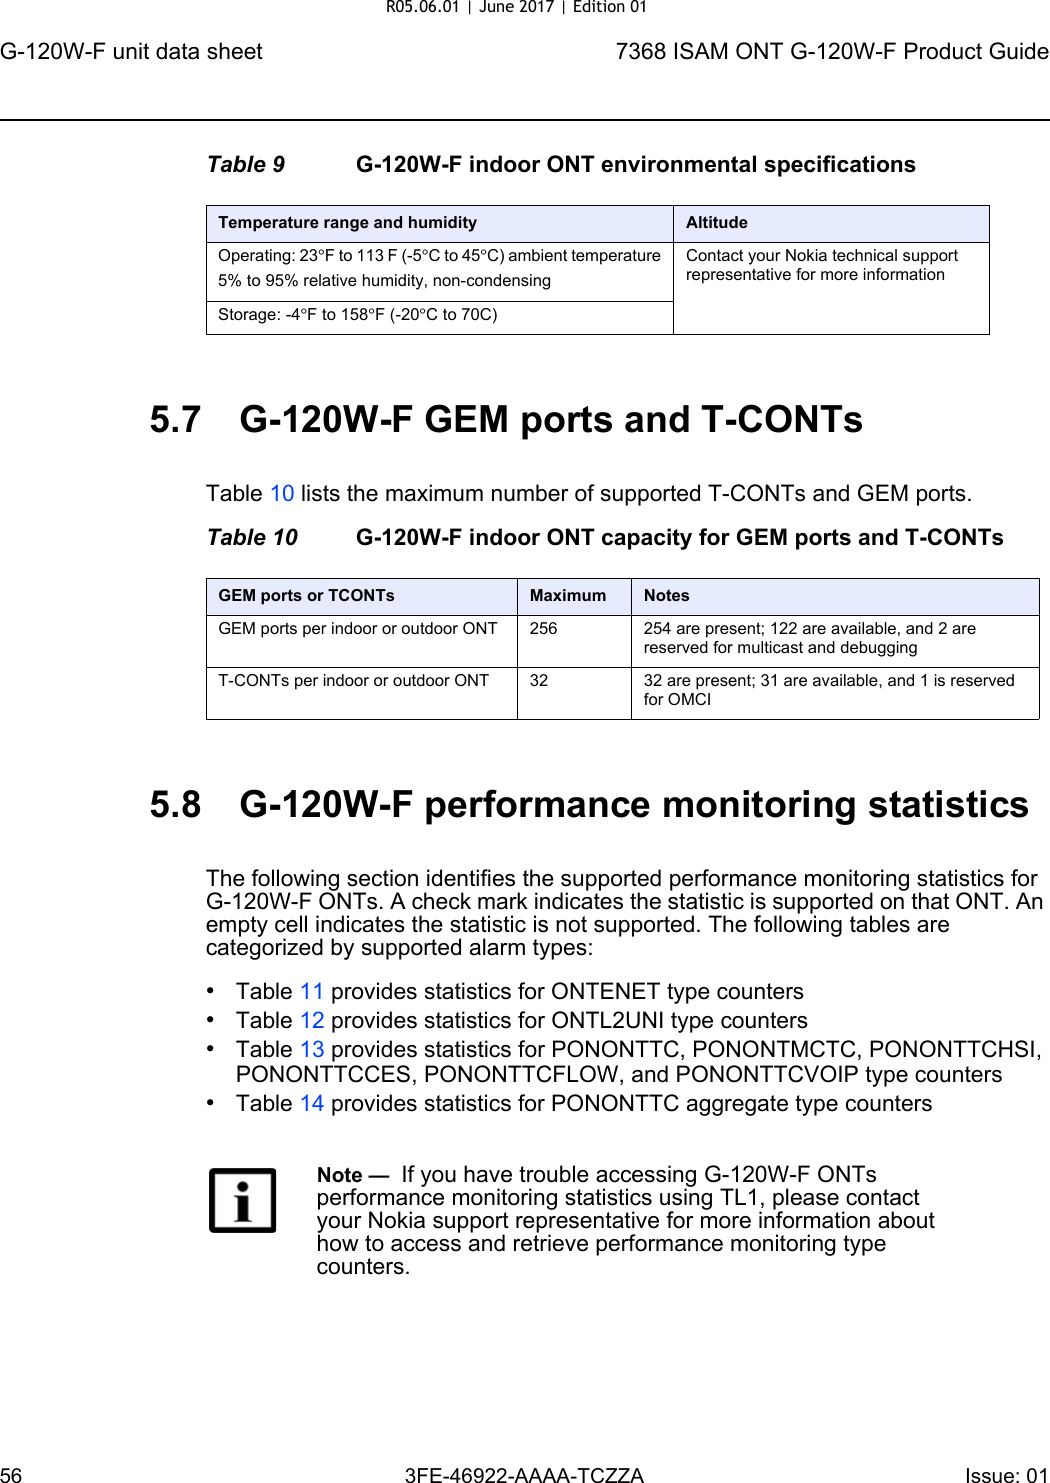 G-120W-F unit data sheet567368 ISAM ONT G-120W-F Product Guide3FE-46922-AAAA-TCZZA Issue: 01 Table 9 G-120W-F indoor ONT environmental specifications5.7 G-120W-F GEM ports and T-CONTsTable 10 lists the maximum number of supported T-CONTs and GEM ports.Table 10 G-120W-F indoor ONT capacity for GEM ports and T-CONTs5.8 G-120W-F performance monitoring statisticsThe following section identifies the supported performance monitoring statistics for G-120W-F ONTs. A check mark indicates the statistic is supported on that ONT. An empty cell indicates the statistic is not supported. The following tables are categorized by supported alarm types:•Table 11 provides statistics for ONTENET type counters•Table 12 provides statistics for ONTL2UNI type counters•Table 13 provides statistics for PONONTTC, PONONTMCTC, PONONTTCHSI, PONONTTCCES, PONONTTCFLOW, and PONONTTCVOIP type counters•Table 14 provides statistics for PONONTTC aggregate type countersTemperature range and humidity AltitudeOperating: 23°F to 113 F (-5°C to 45°C) ambient temperature5% to 95% relative humidity, non-condensingContact your Nokia technical support representative for more informationStorage: -4°F to 158°F (-20°C to 70C)GEM ports or TCONTs Maximum NotesGEM ports per indoor or outdoor ONT 256 254 are present; 122 are available, and 2 are reserved for multicast and debuggingT-CONTs per indoor or outdoor ONT 32 32 are present; 31 are available, and 1 is reserved for OMCINote —  If you have trouble accessing G-120W-F ONTs performance monitoring statistics using TL1, please contact your Nokia support representative for more information about how to access and retrieve performance monitoring type counters.R05.06.01 | June 2017 | Edition 01 